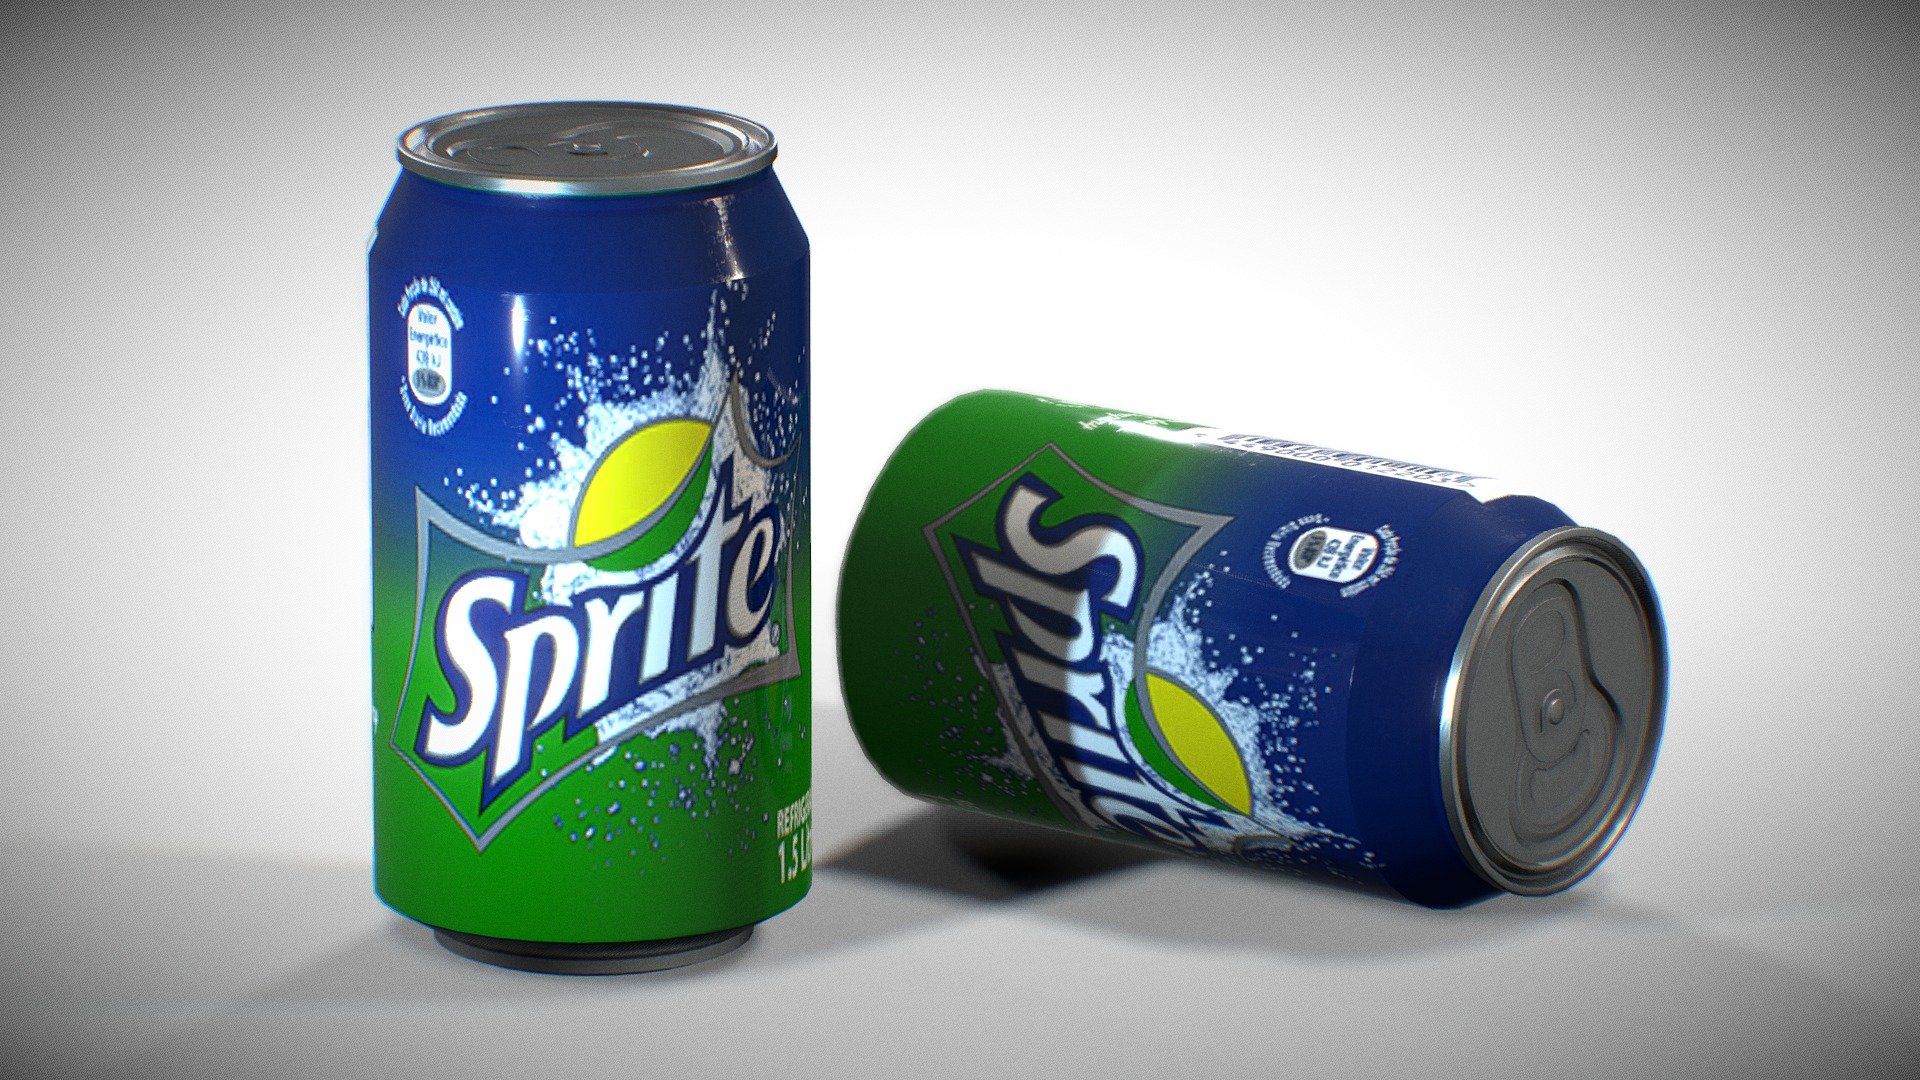 cold-drink CAN lowpoly 3dmodel,it is ready for render engines like Unity,Vray,Cycles,UnrealEngine4 and other.This lowpoly model is equipped with PBR maps with 4K resolution textures.This includes-A.O,Diffuse,Normal,Displacement,Roughness,Metallic.This model is in real-world proportion.It is converted in formats like-3ds,abc,dae,fbx,obj,ply and stl 3d model